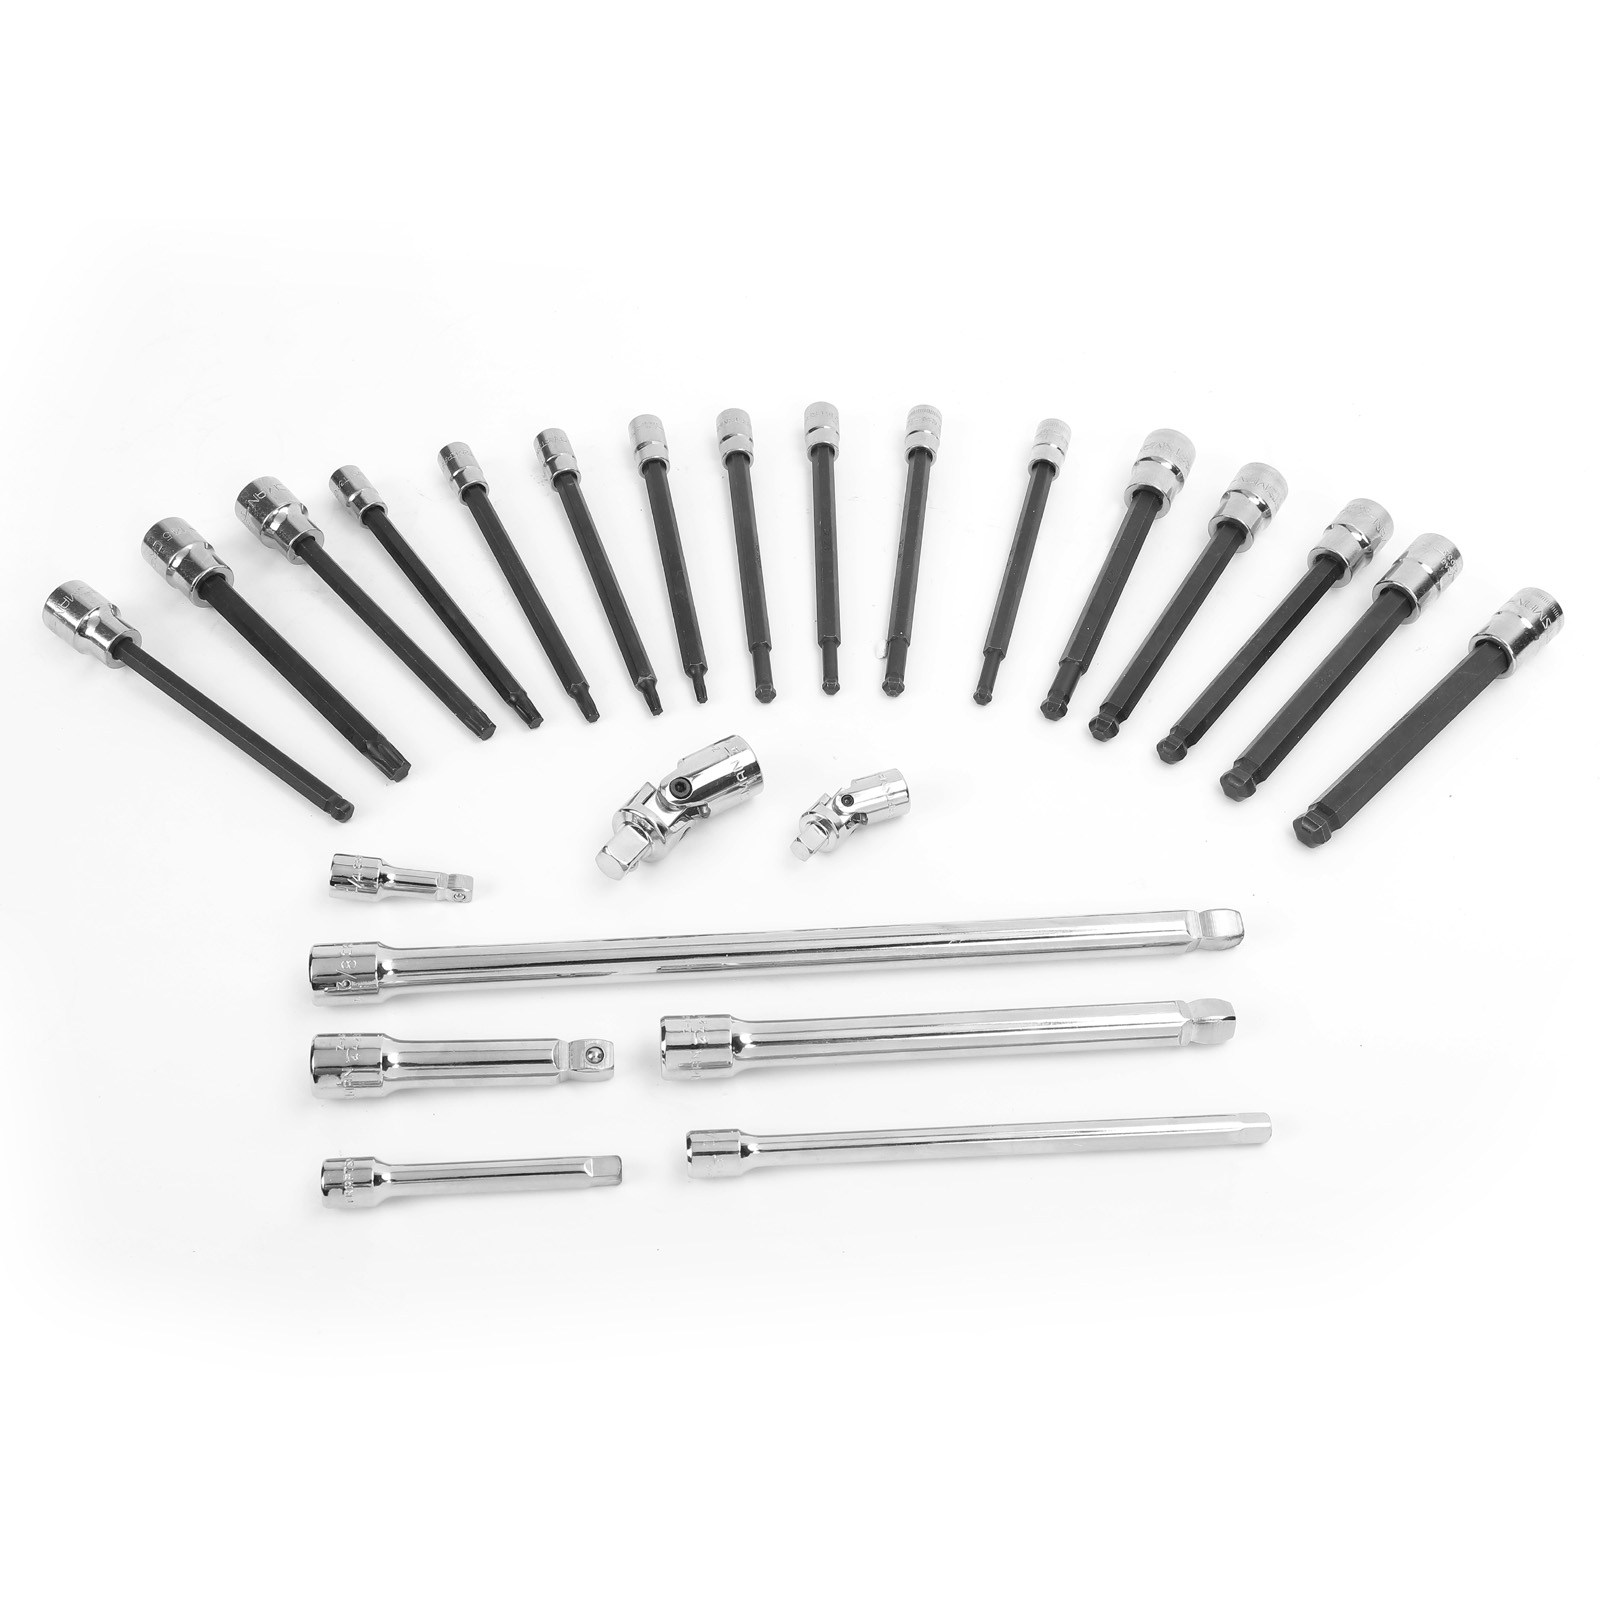 Craftsman 24-Piece Reach and Access Add-On Set